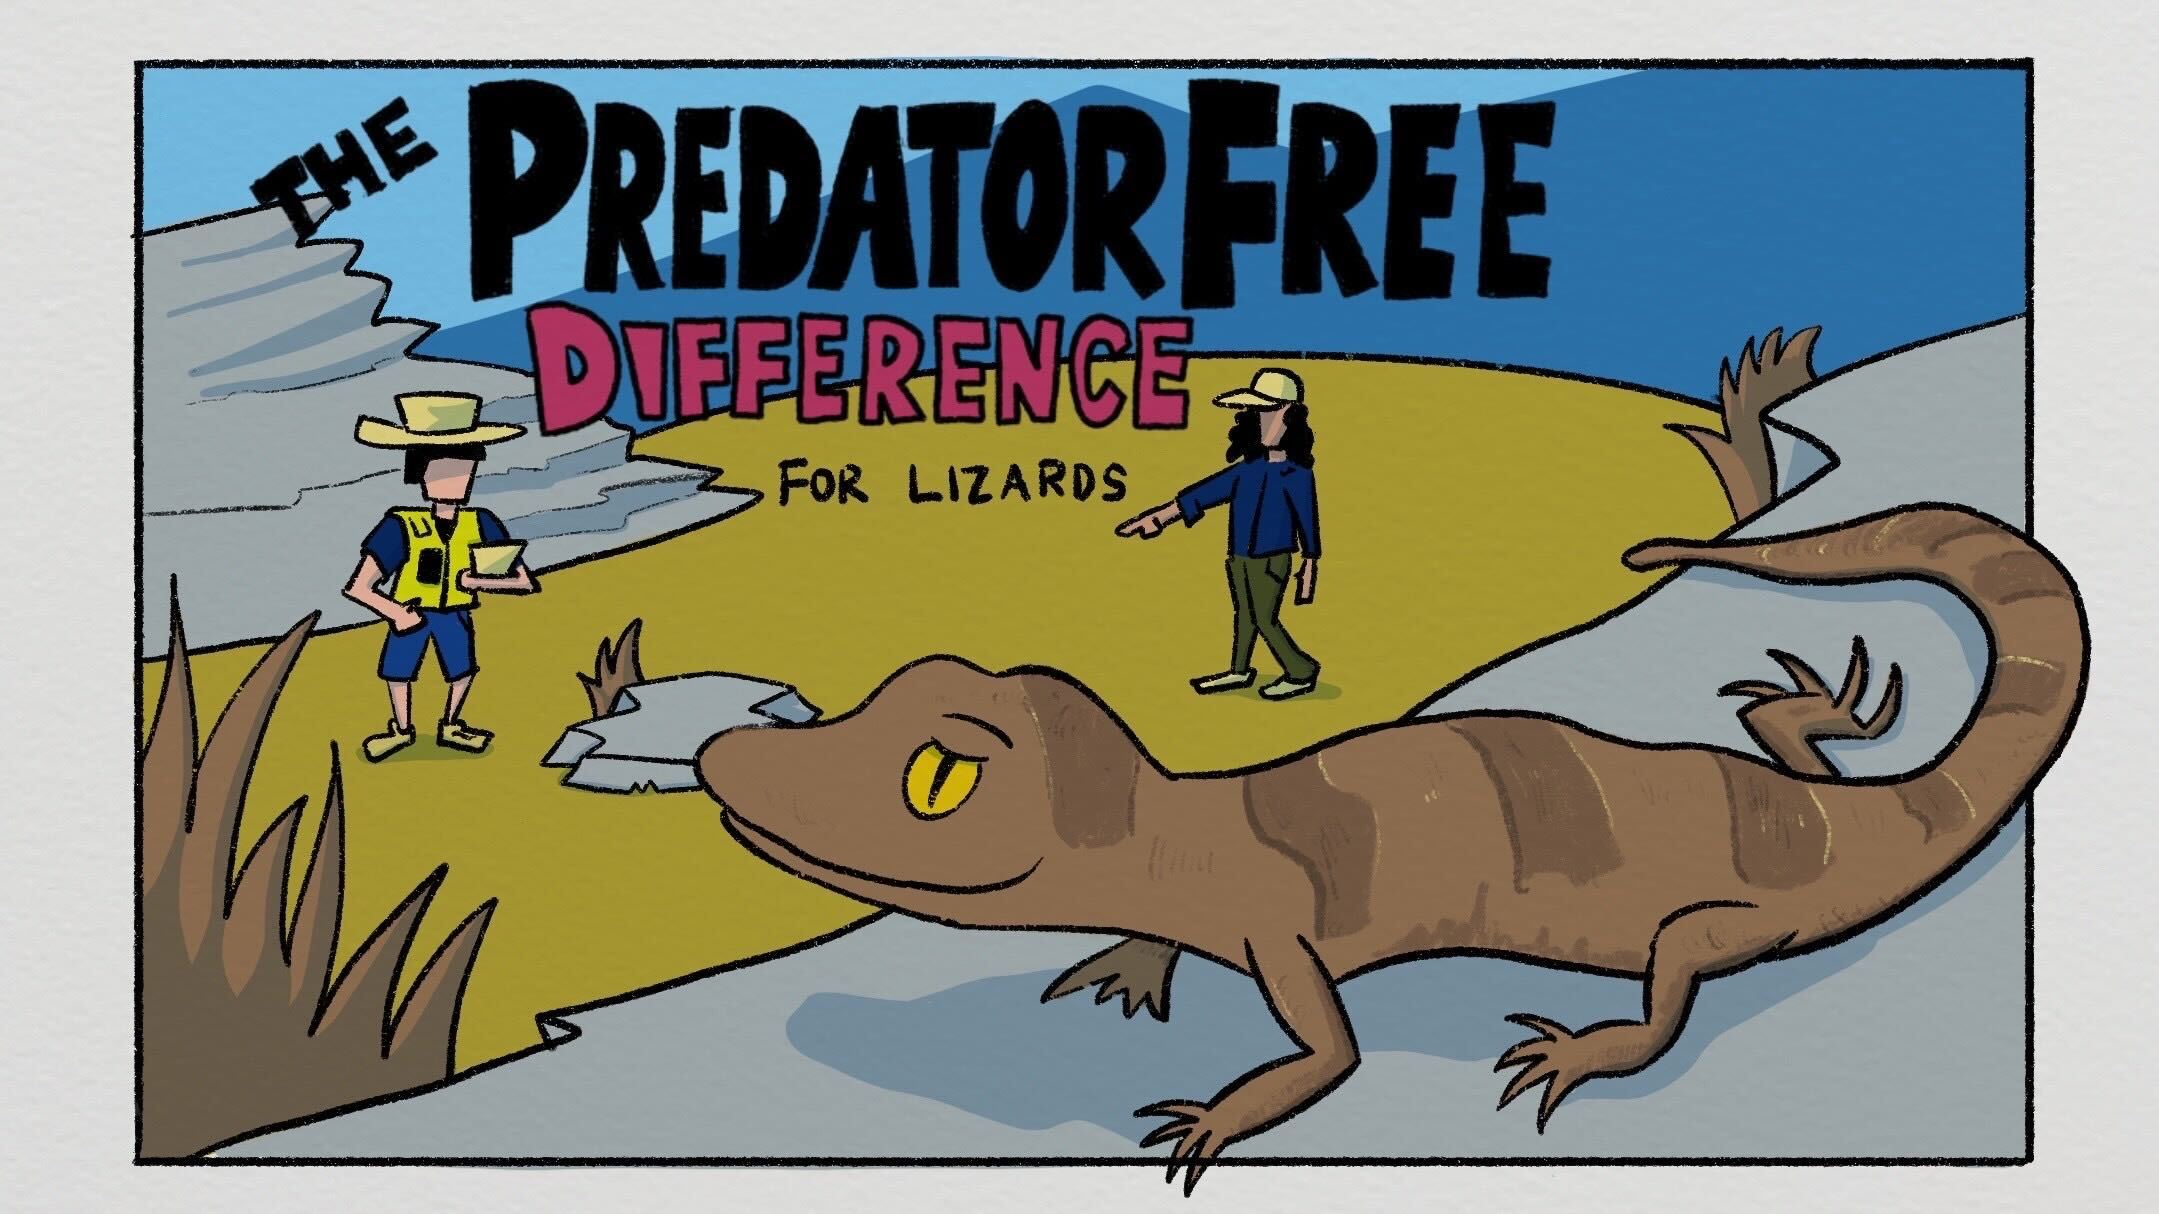 Comic: the predator free difference for lizards